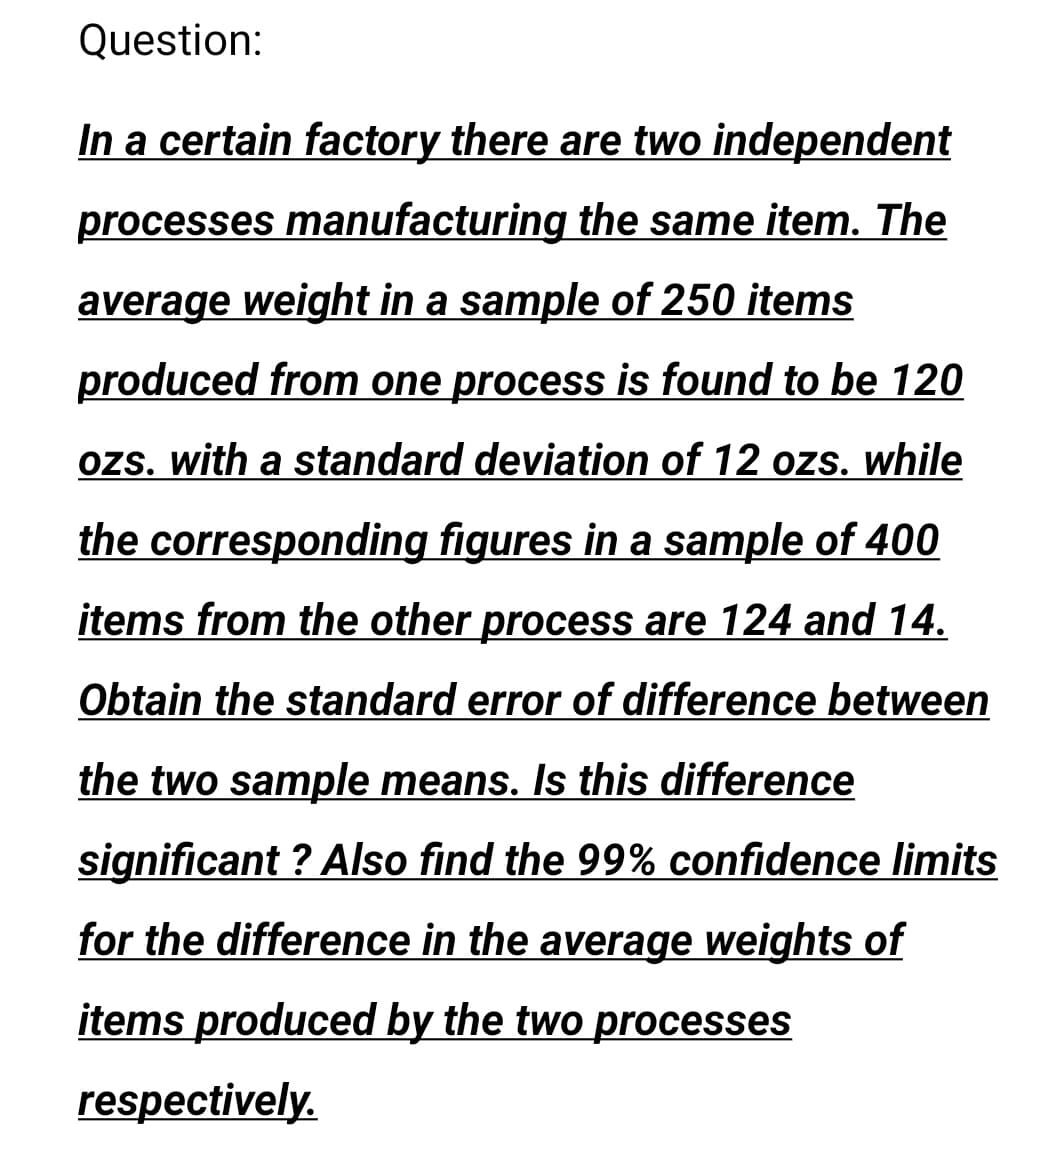 Question:
In a certain factory there are two independent
processes manufacturing the same item. The
average weight in a sample of 250 items
produced from one process is found to be 120
ozs. with a standard deviation of 12 ozs. while
the corresponding figures in a sample of 400
items from the other process are 124 and 14.
Obtain the standard error of difference between
the two sample means. Is this difference
significant ? Also find the 99% confidence limits
for the difference in the average weights of
items produced by the two processes
respectively.
